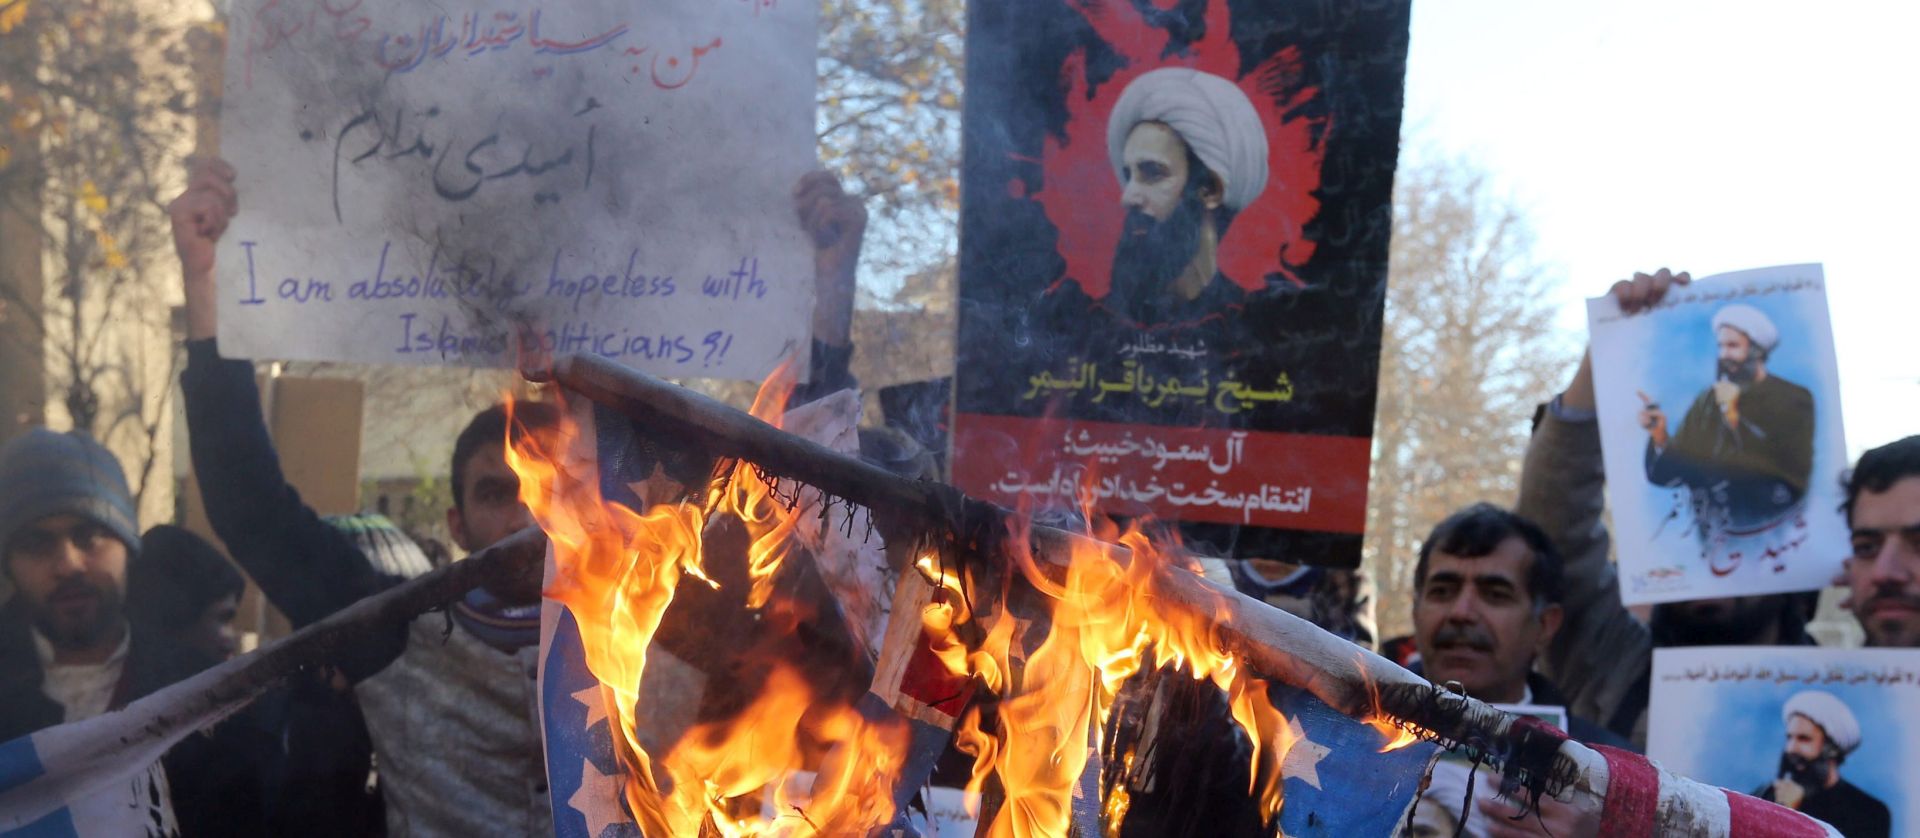 epa05086825 Iranian protestors burn US and Israeli flags as they hold posters of late Shiite cleric Nimr al-Nimr during a demonstration near the Saudi Arabian embassy in Tehran, Iran, 03 January 2016. Iranian Protesters have stormed the Saudi embassy building in the Iranian capital of Tehran early 03 January amid backlash over the execution of a prominent Shiite cleric. Flammable substance was seen thrown at the building as protests gained steam over the execution of Sheikh Nimr al-Nimr. Reports states, protesters taking down a Saudi flag and burned the building.  EPA/ABEDIN TAHERKENAREH